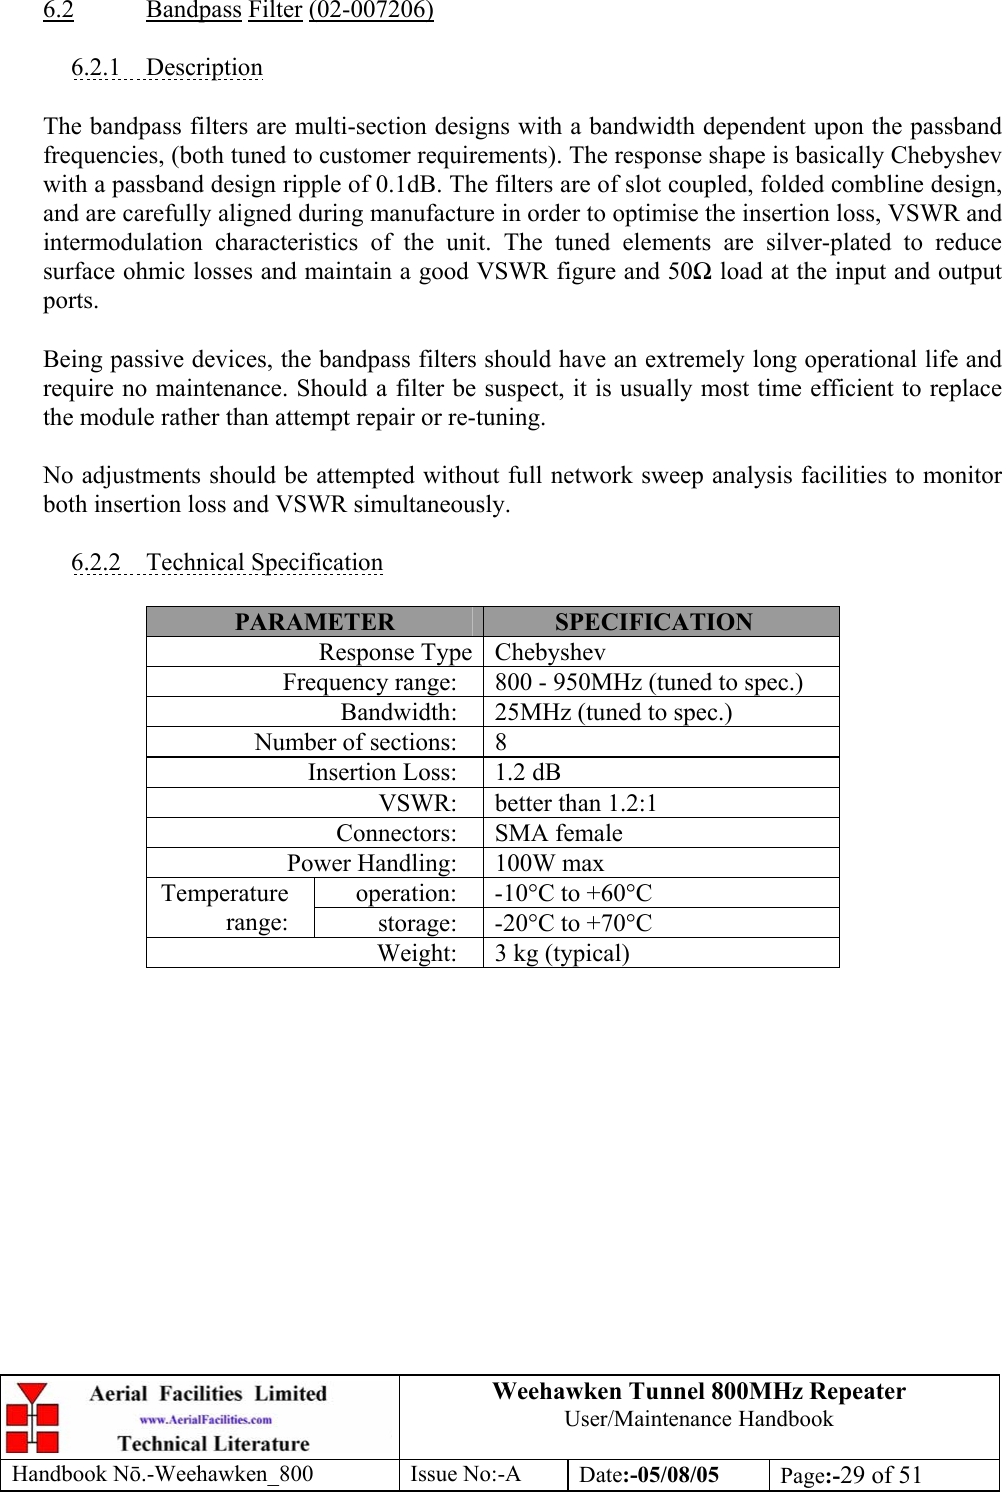 Weehawken Tunnel 800MHz Repeater User/Maintenance Handbook Handbook N.-Weehawken_800 Issue No:-A Date:-05/08/05  Page:-29 of 51   6.2 Bandpass Filter (02-007206)  6.2.1 Description  The bandpass filters are multi-section designs with a bandwidth dependent upon the passband frequencies, (both tuned to customer requirements). The response shape is basically Chebyshev with a passband design ripple of 0.1dB. The filters are of slot coupled, folded combline design, and are carefully aligned during manufacture in order to optimise the insertion loss, VSWR and intermodulation characteristics of the unit. The tuned elements are silver-plated to reduce surface ohmic losses and maintain a good VSWR figure and 50 load at the input and output ports.  Being passive devices, the bandpass filters should have an extremely long operational life and require no maintenance. Should a filter be suspect, it is usually most time efficient to replace the module rather than attempt repair or re-tuning.  No adjustments should be attempted without full network sweep analysis facilities to monitor both insertion loss and VSWR simultaneously.  6.2.2 Technical Specification  PARAMETER  SPECIFICATION Response Type Chebyshev Frequency range:  800 - 950MHz (tuned to spec.) Bandwidth:  25MHz (tuned to spec.) Number of sections:  8 Insertion Loss:  1.2 dB VSWR:  better than 1.2:1 Connectors: SMA female Power Handling:  100W max operation:  -10°C to +60°C Temperature range:  storage:  -20°C to +70°C Weight:  3 kg (typical)  